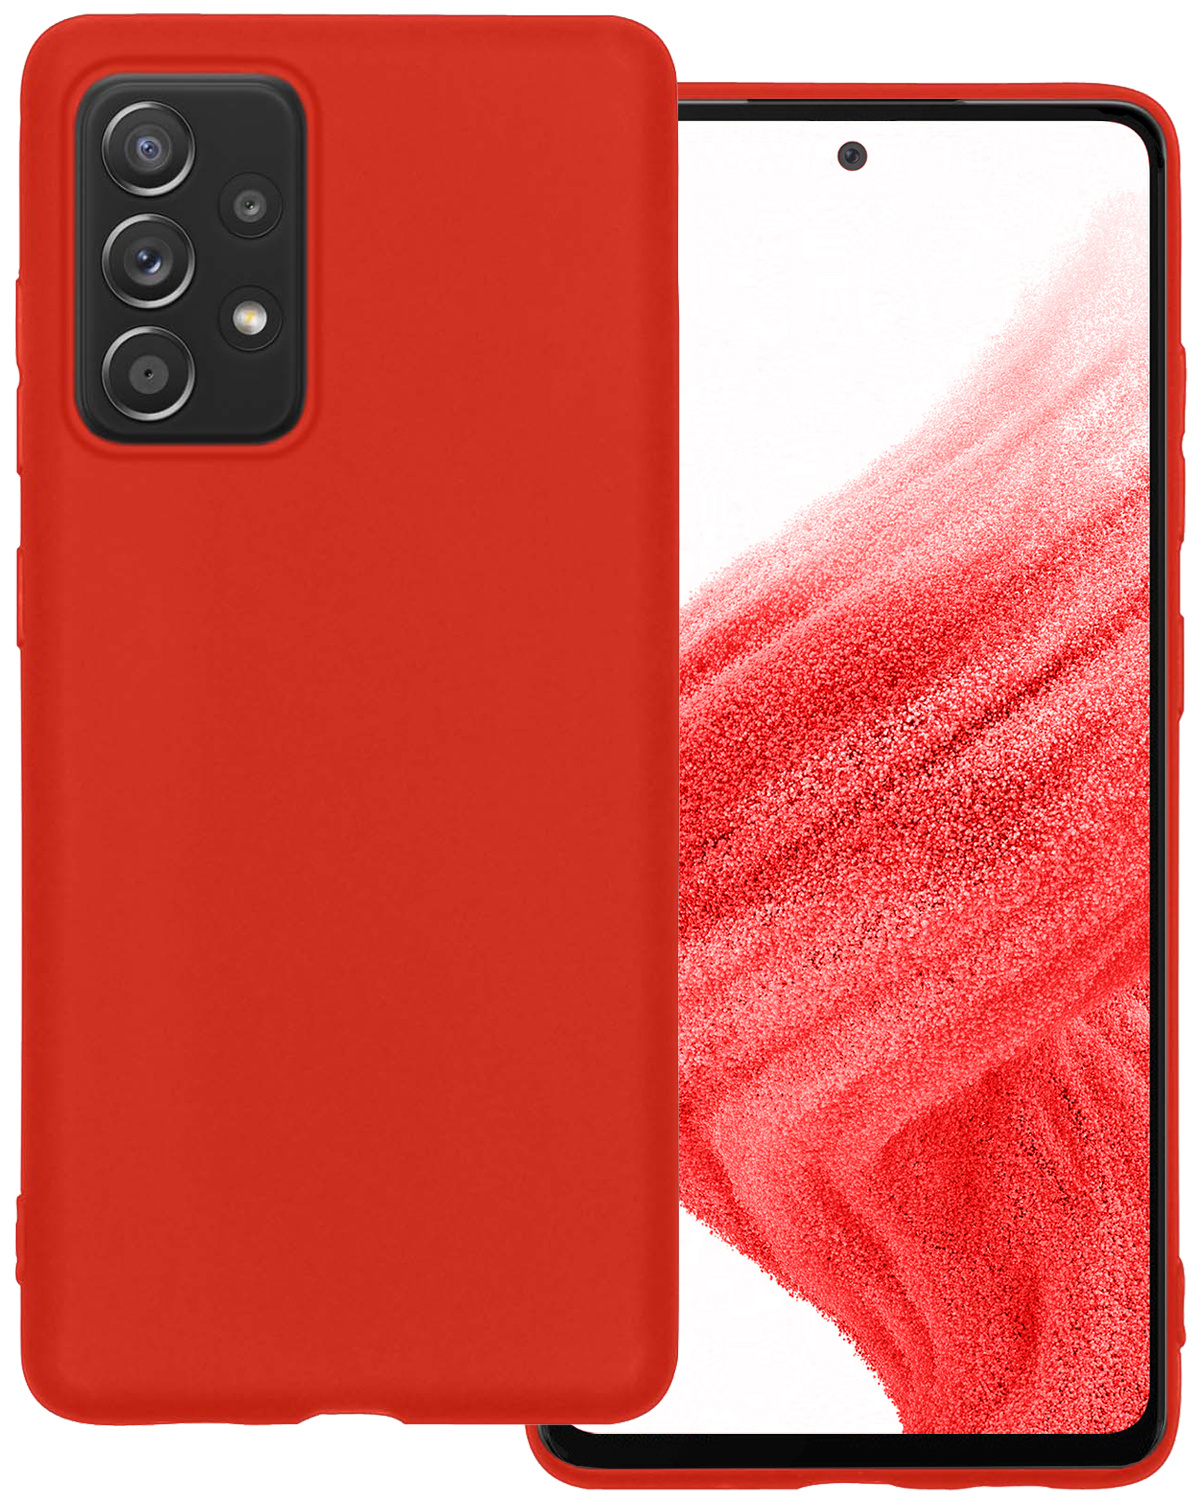 BASEY. Hoes Geschikt voor Samsung A53 Hoesje Siliconen Back Cover Case - Hoesje Geschikt voor Samsung Galaxy A53 Hoes Cover Hoesje - Rood